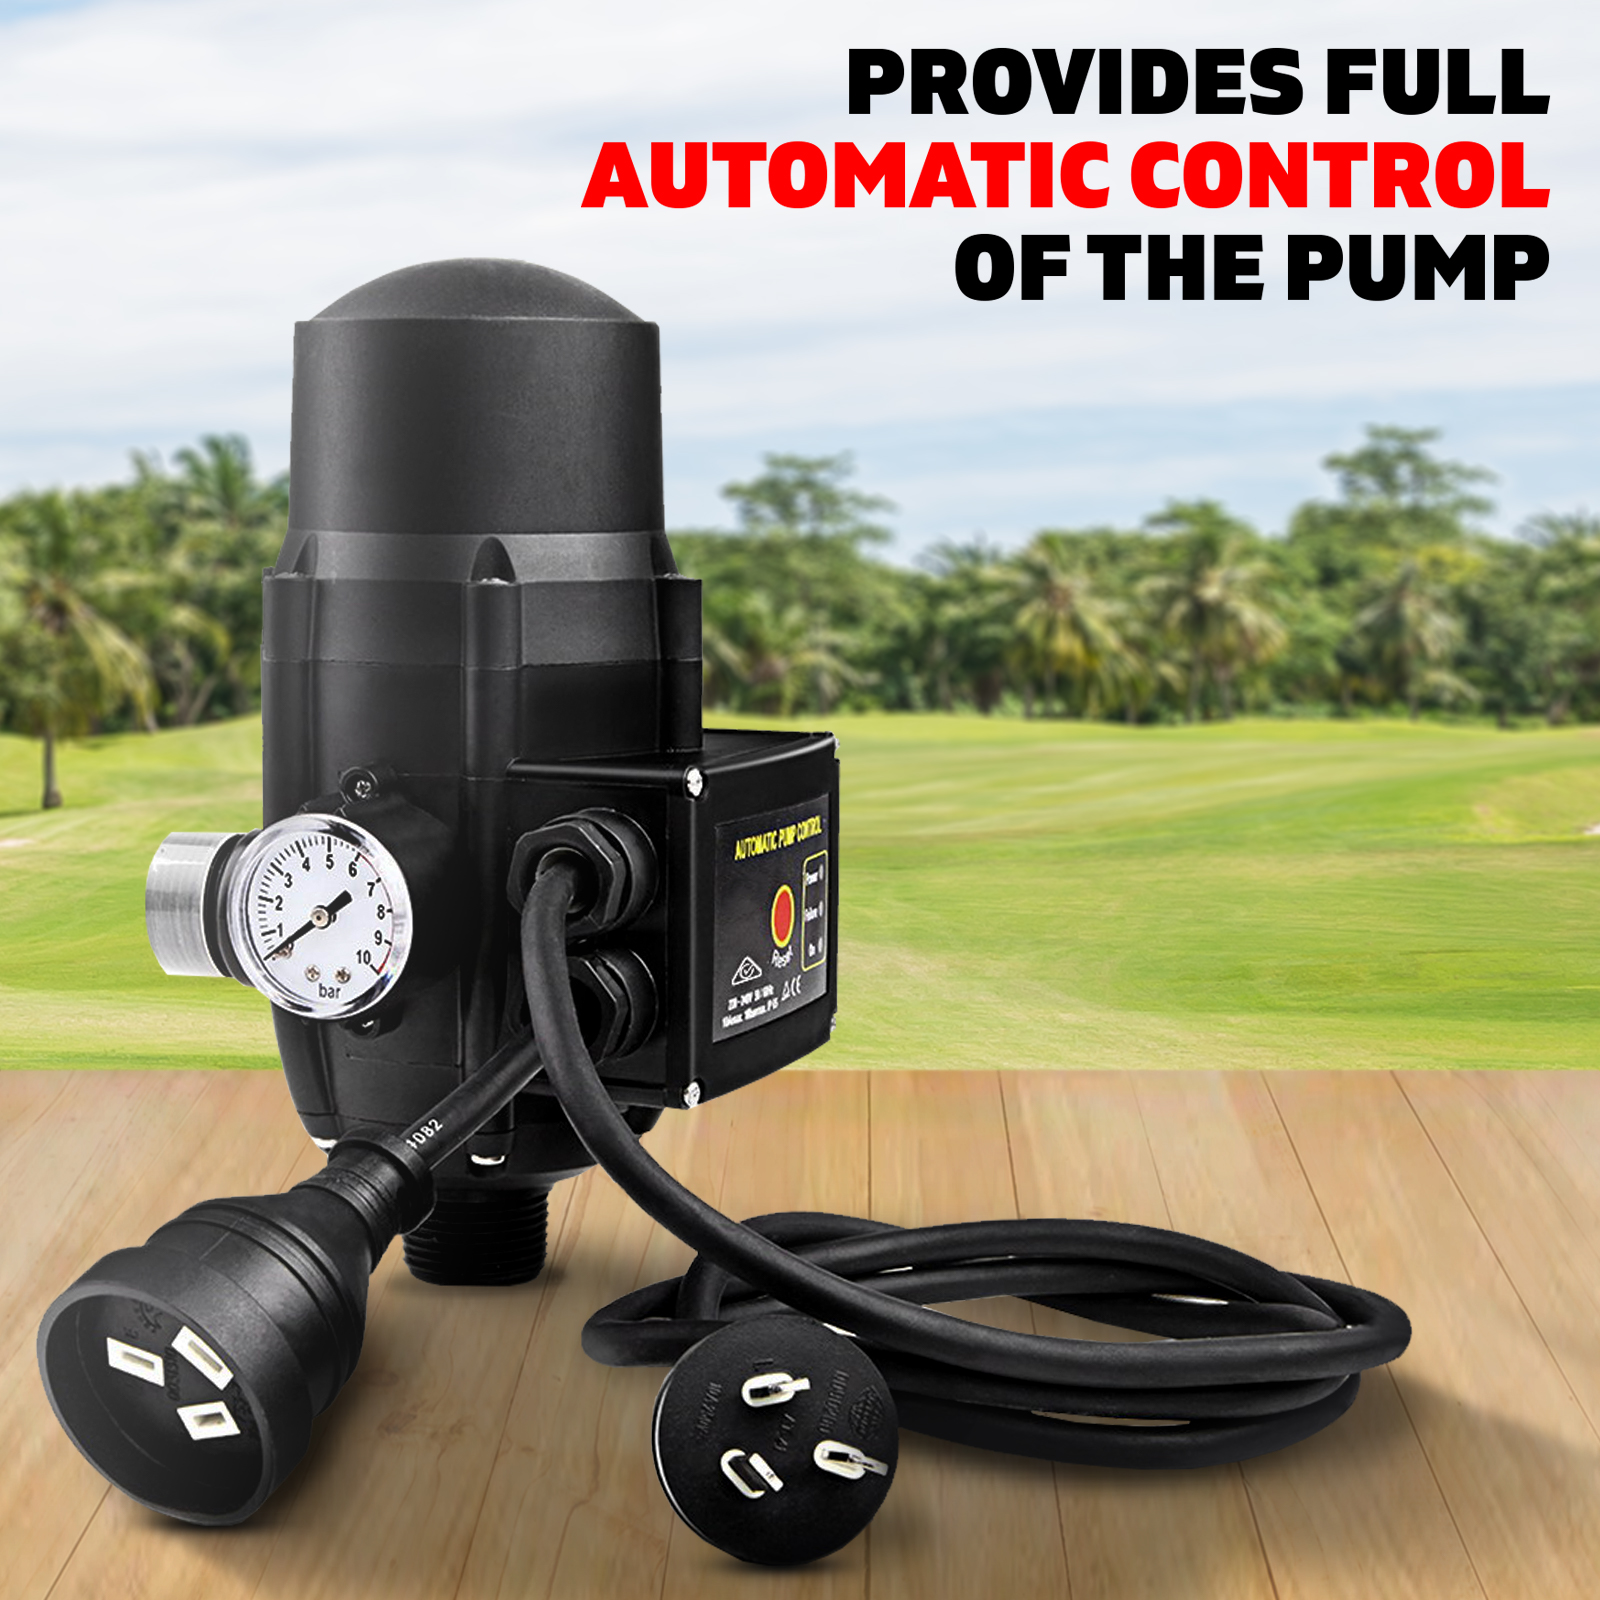 1.5 KG Adjustable Electronic Automatic Water Pump Controller IP65 - Black